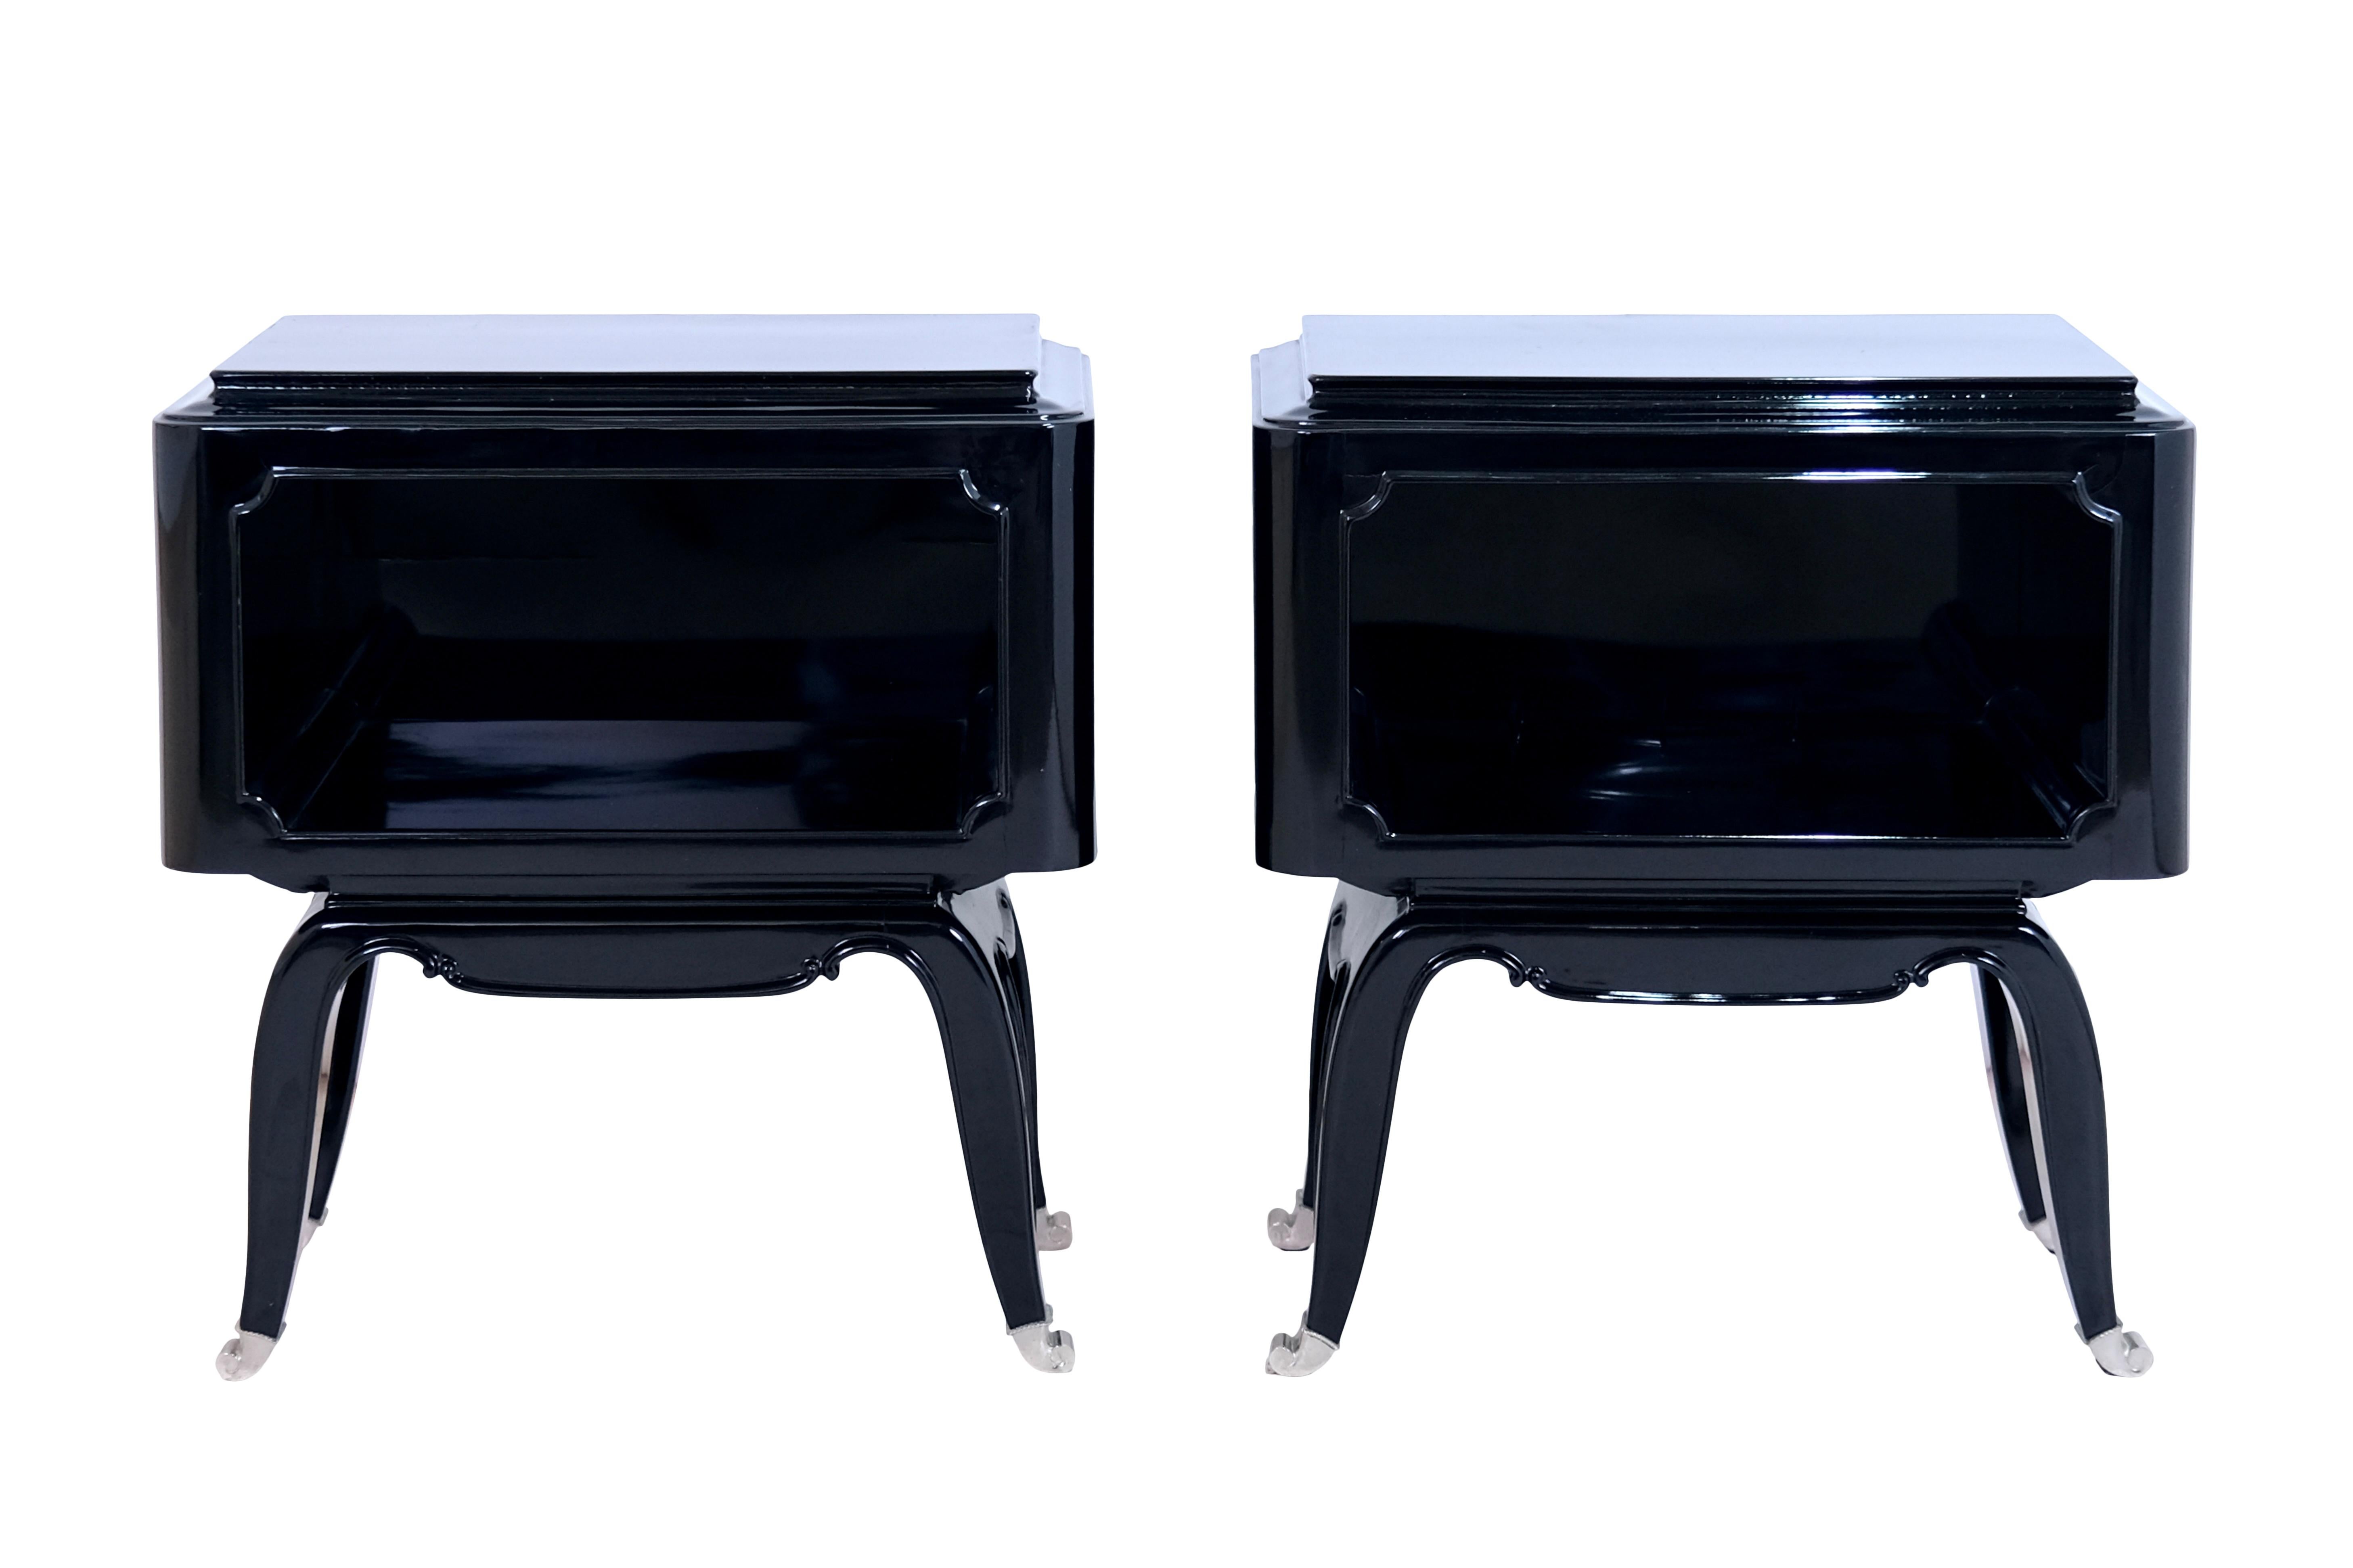 Pair of open bedside tables 
High gloss black piano lacquer
Nickel plated metal sabots on all legs

Original Art Deco, France 1930s

Dimensions:
Width: 55 cm
Height: 60 cm
Depth: 38 cm